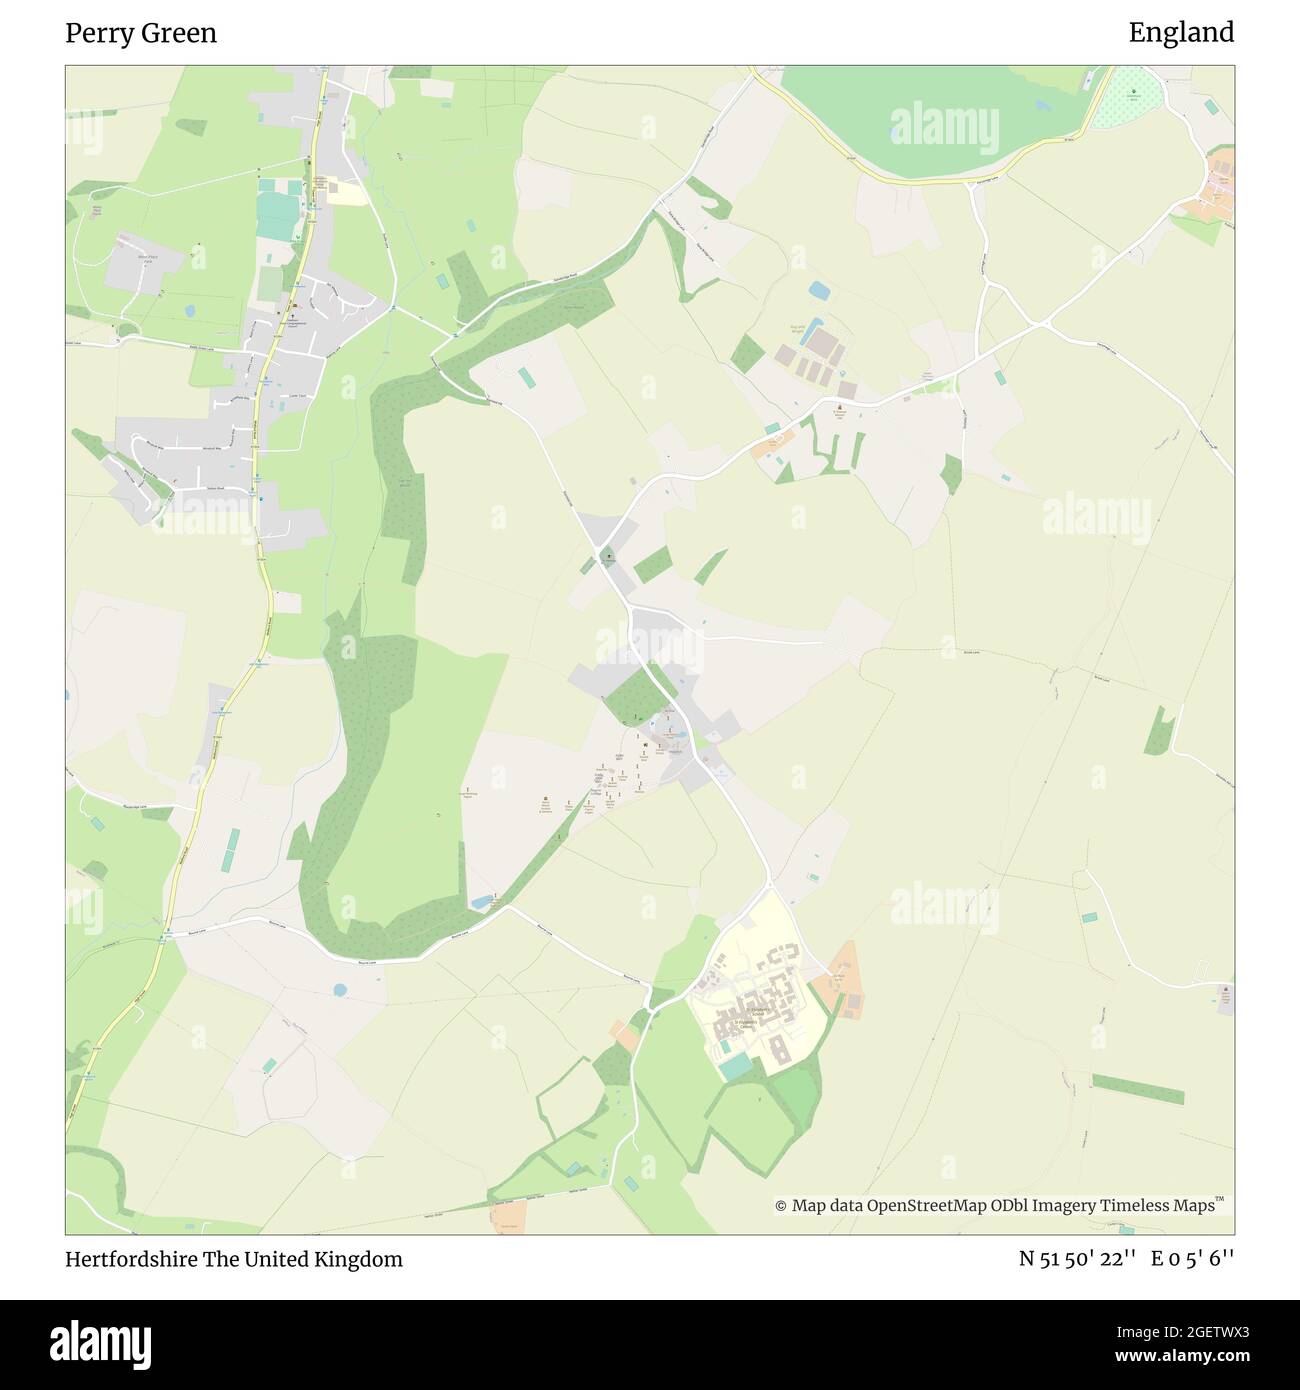 Perry Green, Hertfordshire, United Kingdom, England, N 51 50' 22'', E 0 5' 6'', map, Timeless Map published in 2021. Travelers, explorers and adventurers like Florence Nightingale, David Livingstone, Ernest Shackleton, Lewis and Clark and Sherlock Holmes relied on maps to plan travels to the world's most remote corners, Timeless Maps is mapping most locations on the globe, showing the achievement of great dreams Stock Photo